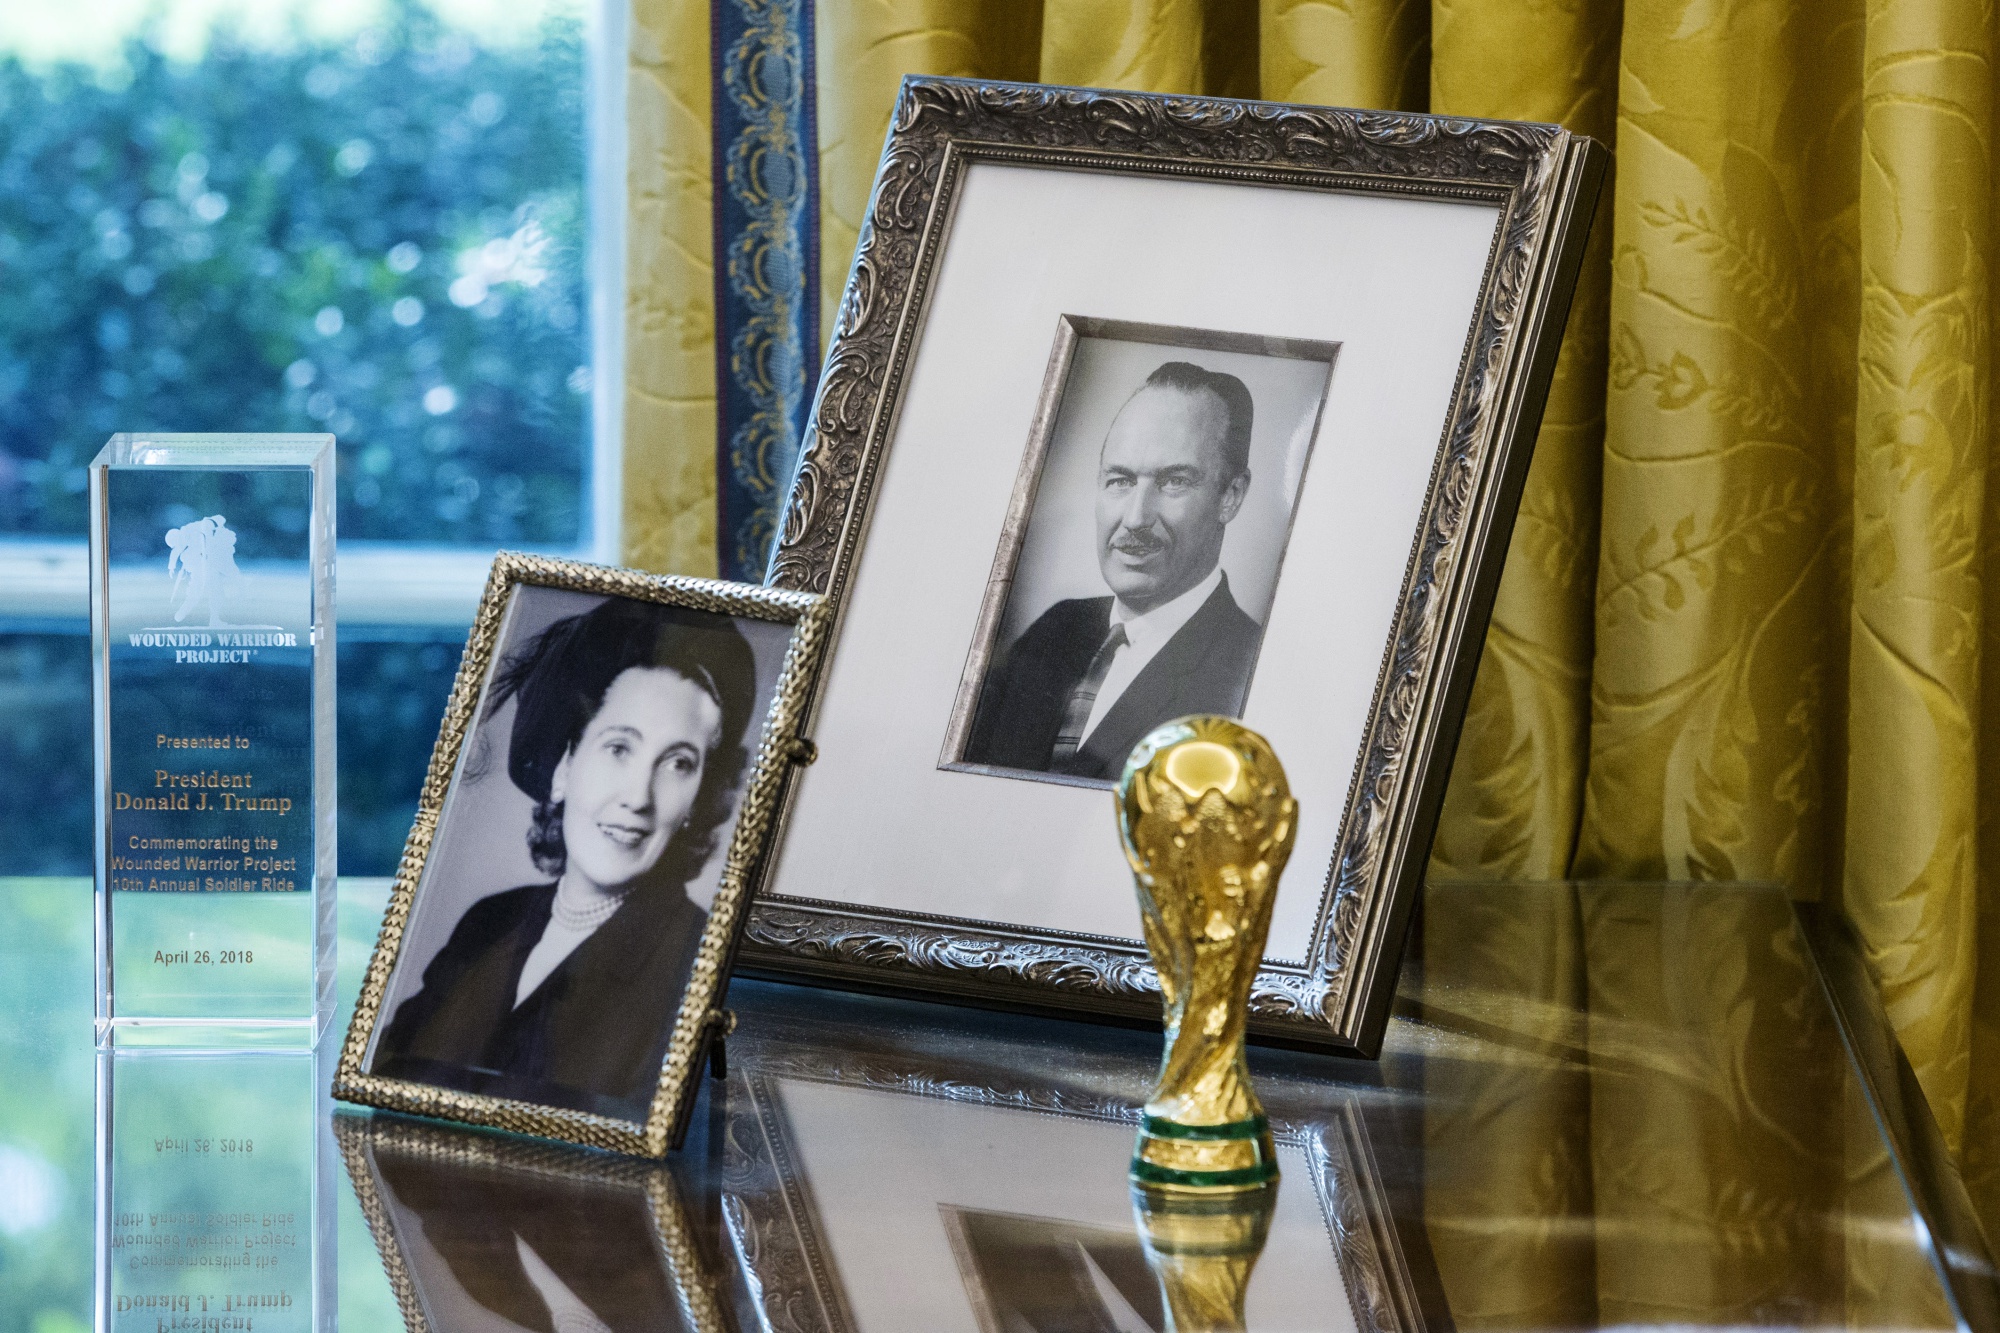 Photographs of Donald Trump's parents, Mary Anne MacLeod Trump and Fred Trump, sit on a desk in the Oval Office at the White House in Washington, D.C.